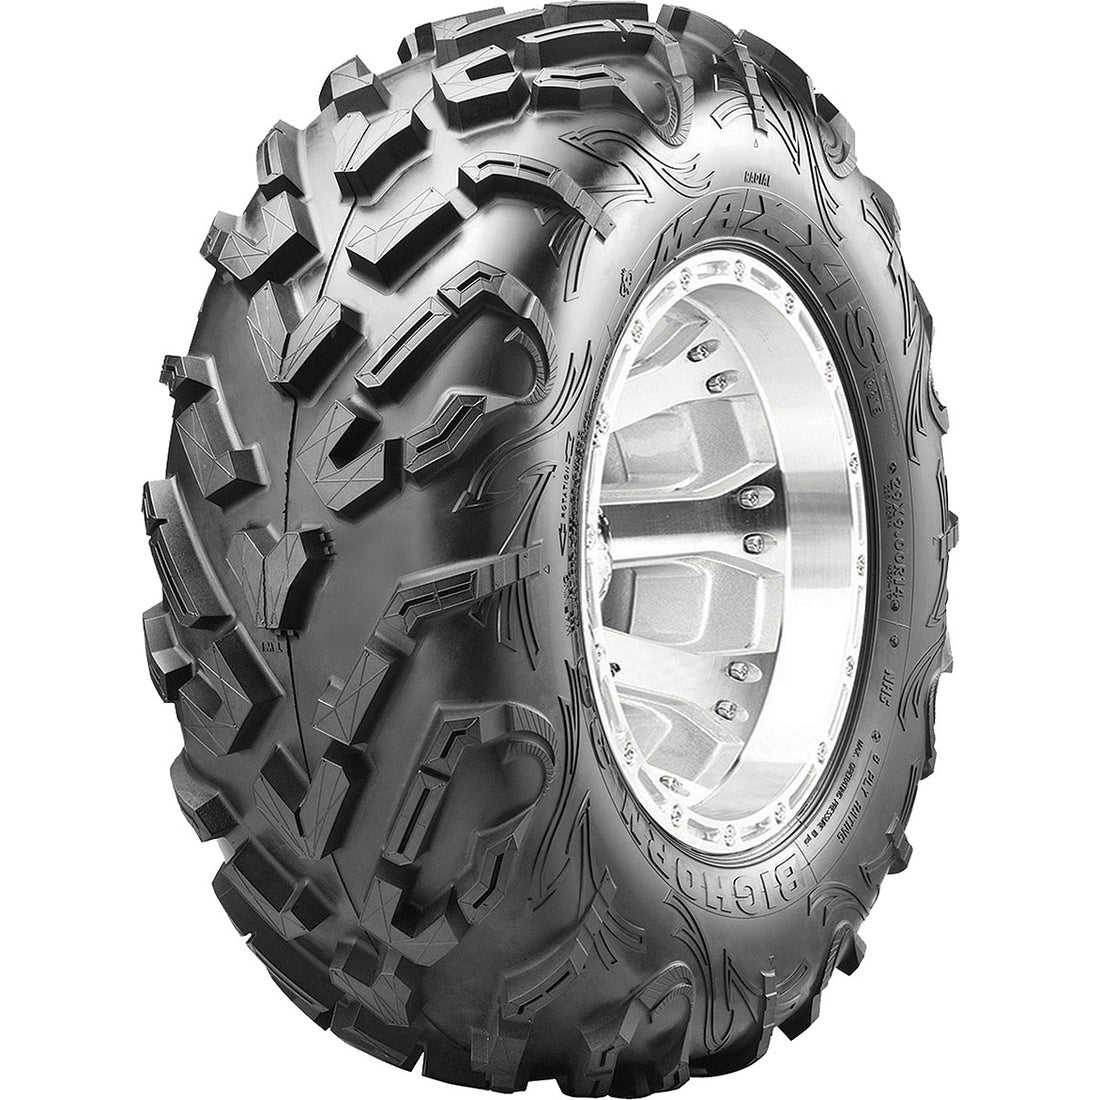 USA - – Maxxis Tires Shop Products Tires |